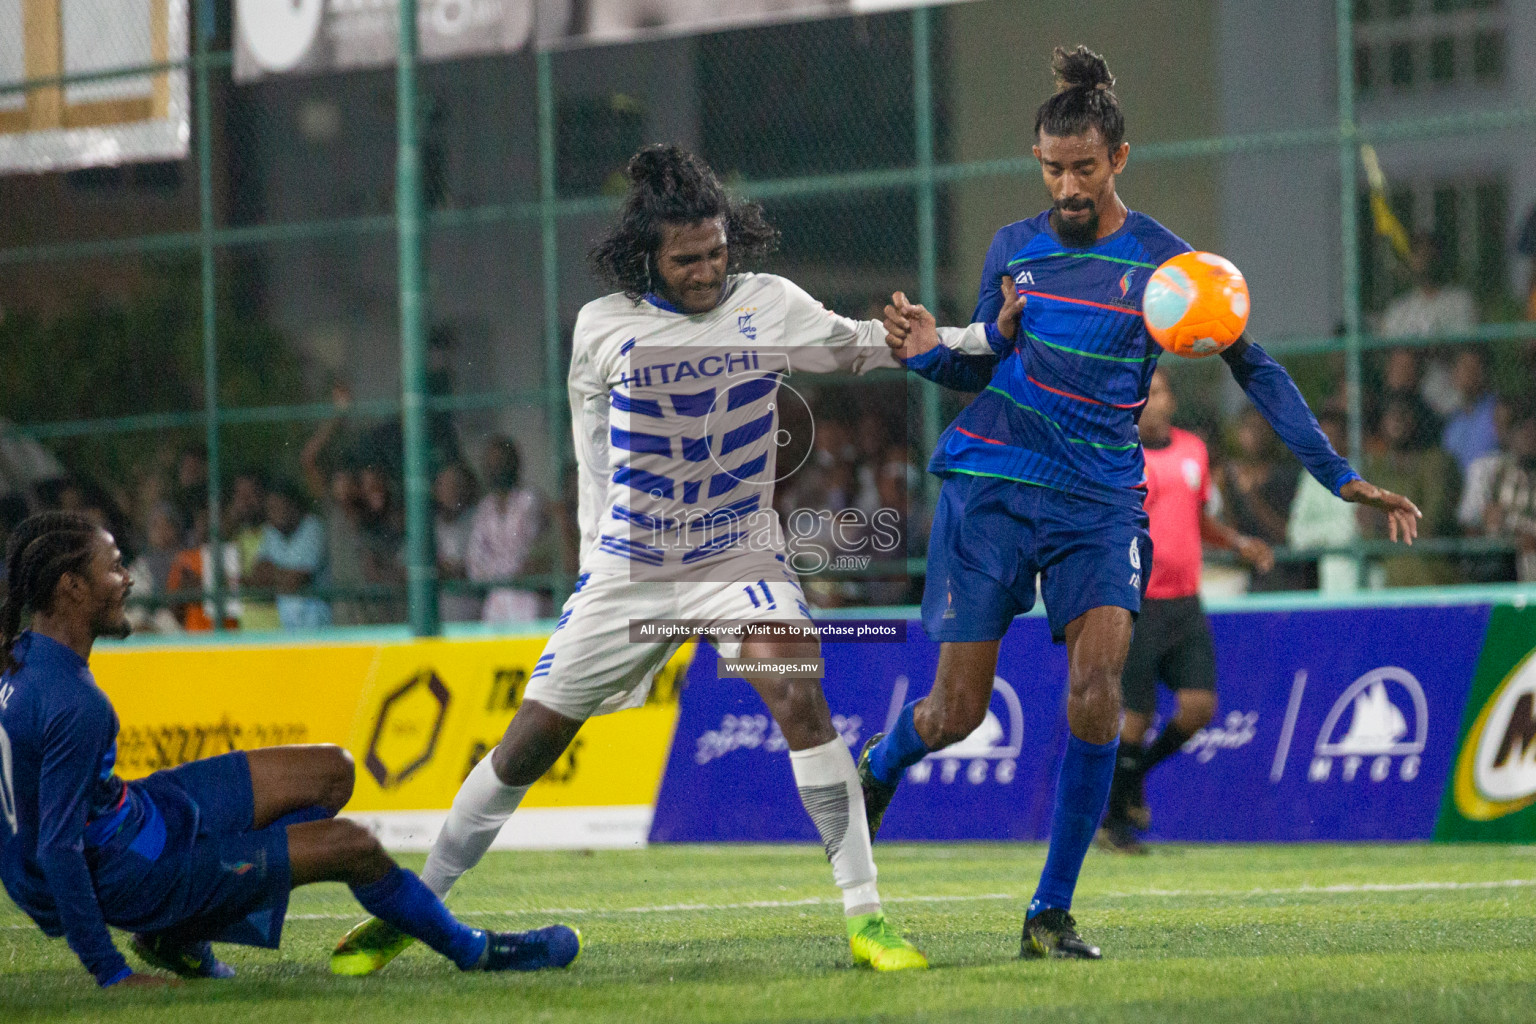 STO RC Vs Team Fenaka in the Quarter Finals of Club Maldives 2021 held in Hulhumale, Maldives on 13 December 2021. Photos: Nasam Thaufeeq